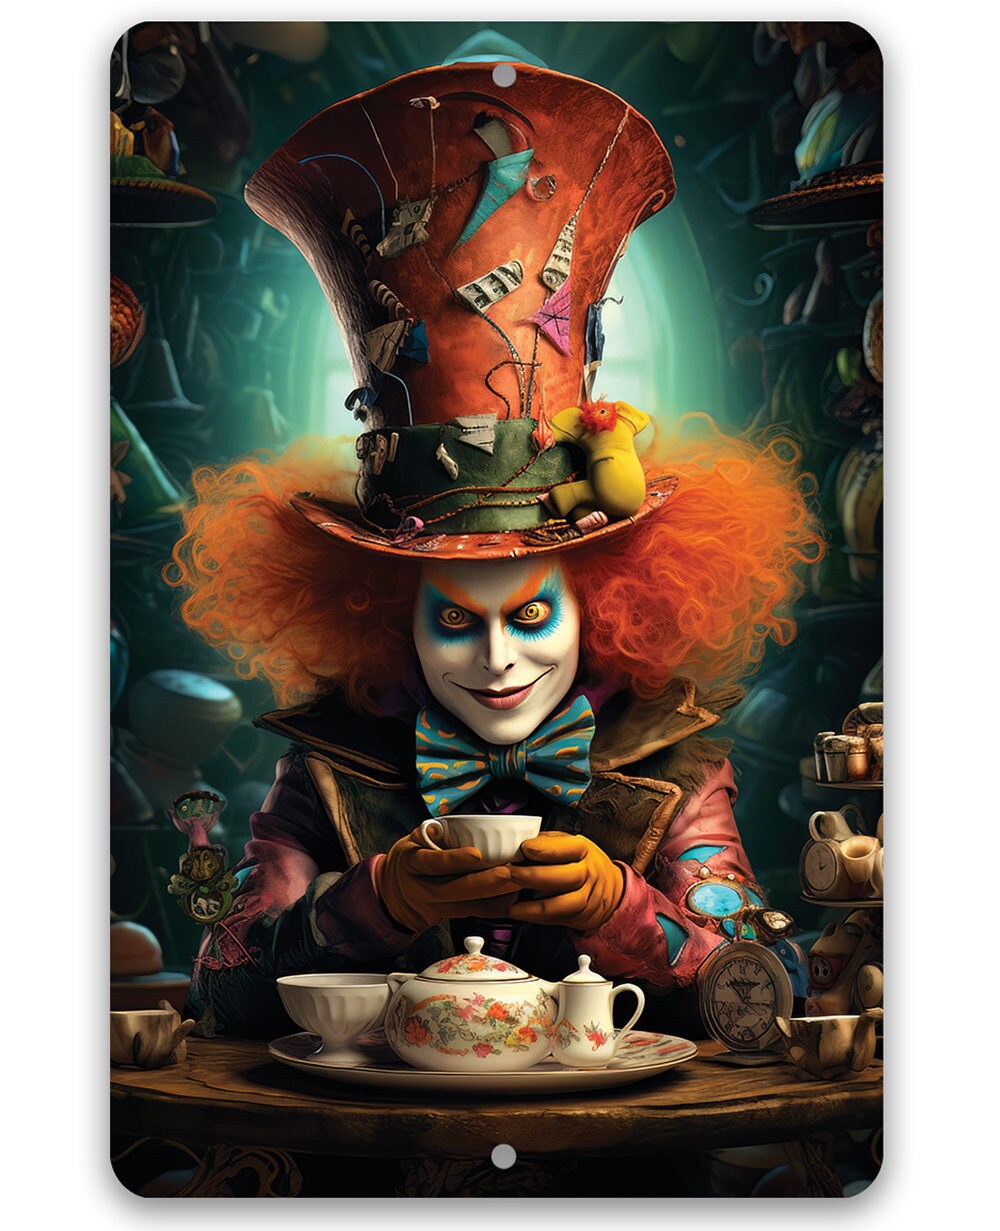 Tin - Metal Sign - Alice In Wonderland - Mad Hatter -8"x12"/12"x18" Indoor/Outdoor-Makes a Great Decor and Gift For Alice in Wonderland Fans